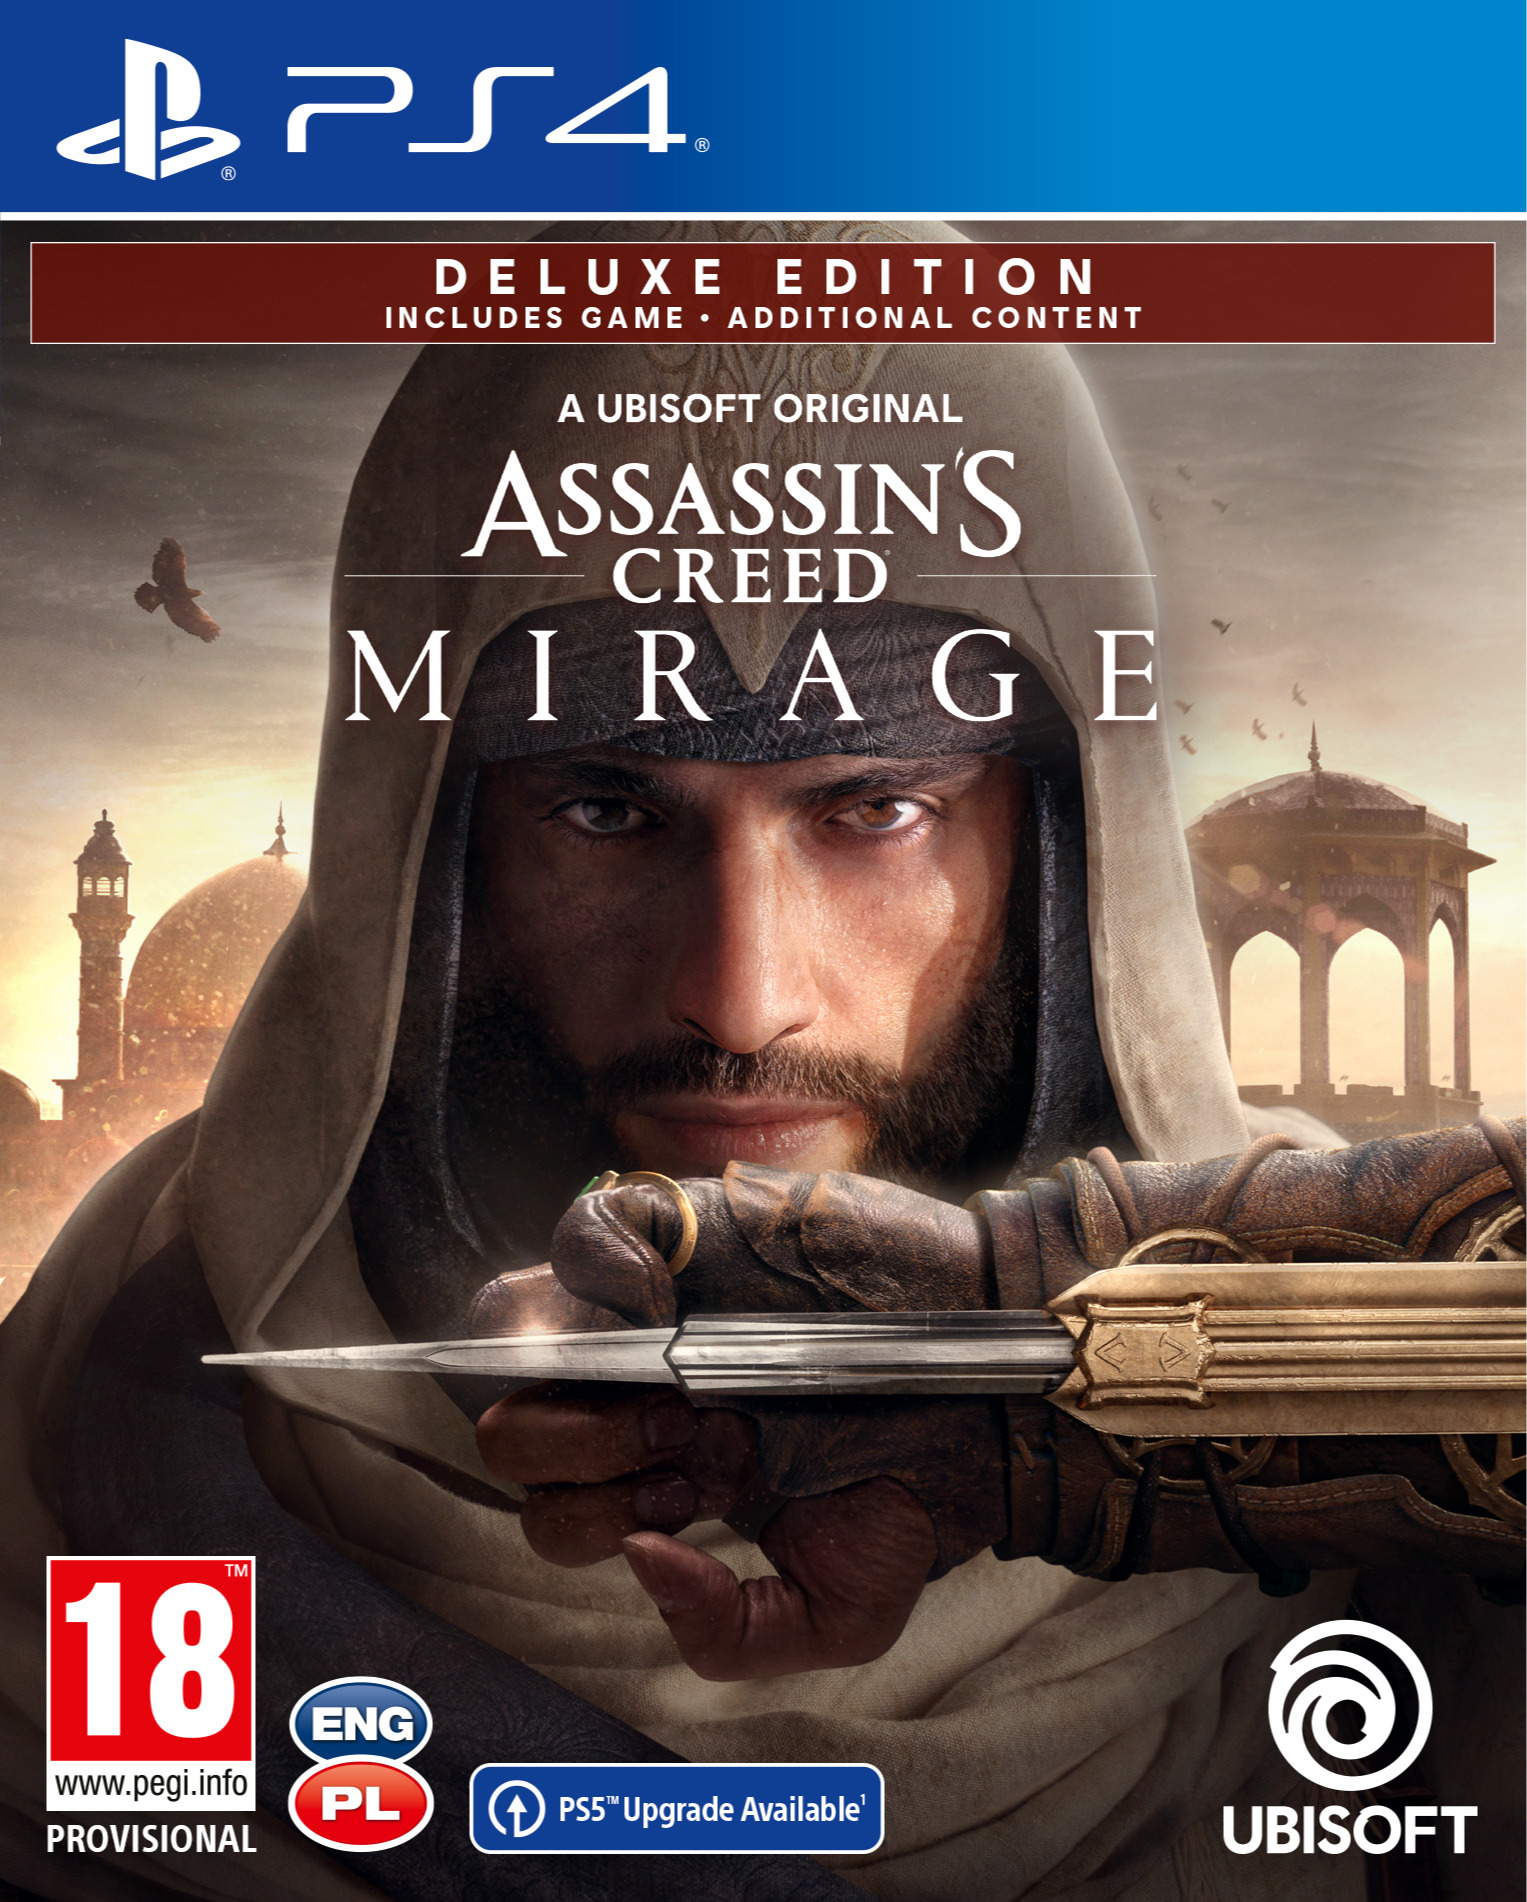 Assassin's Creed: Mirage - Deluxe Edition